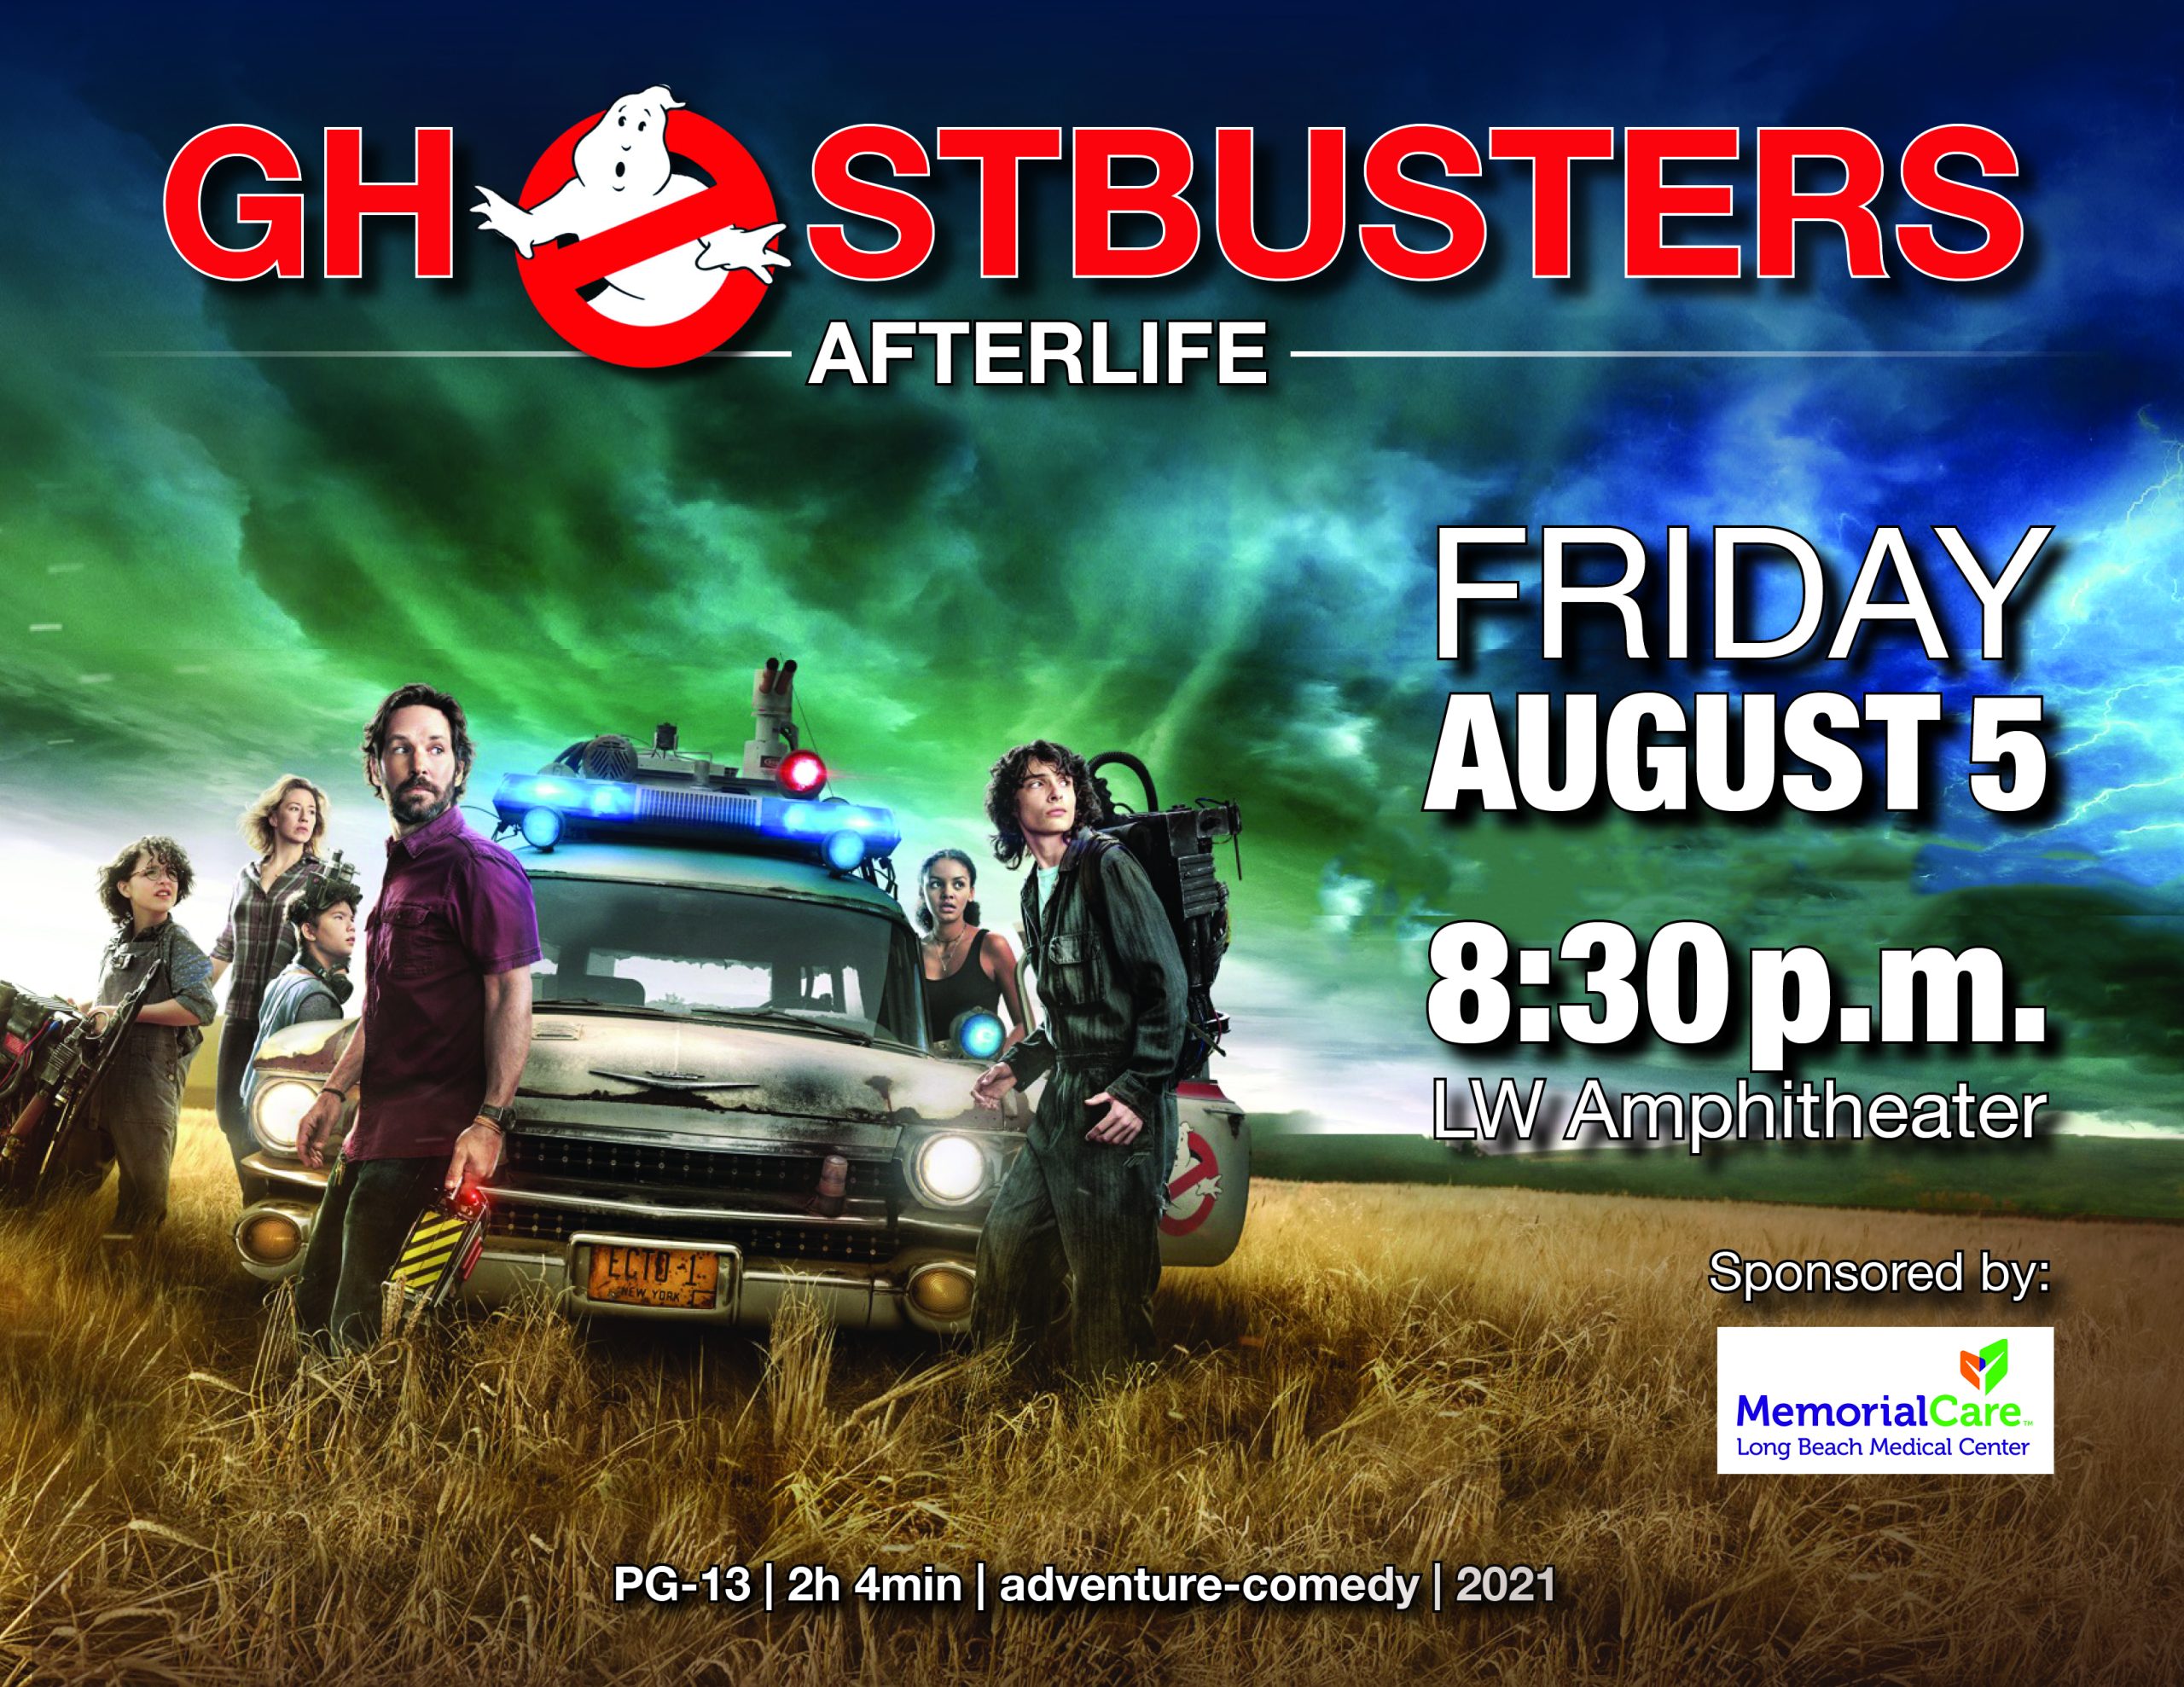 Updated Ghostbusters movie flyer (1) 08-05